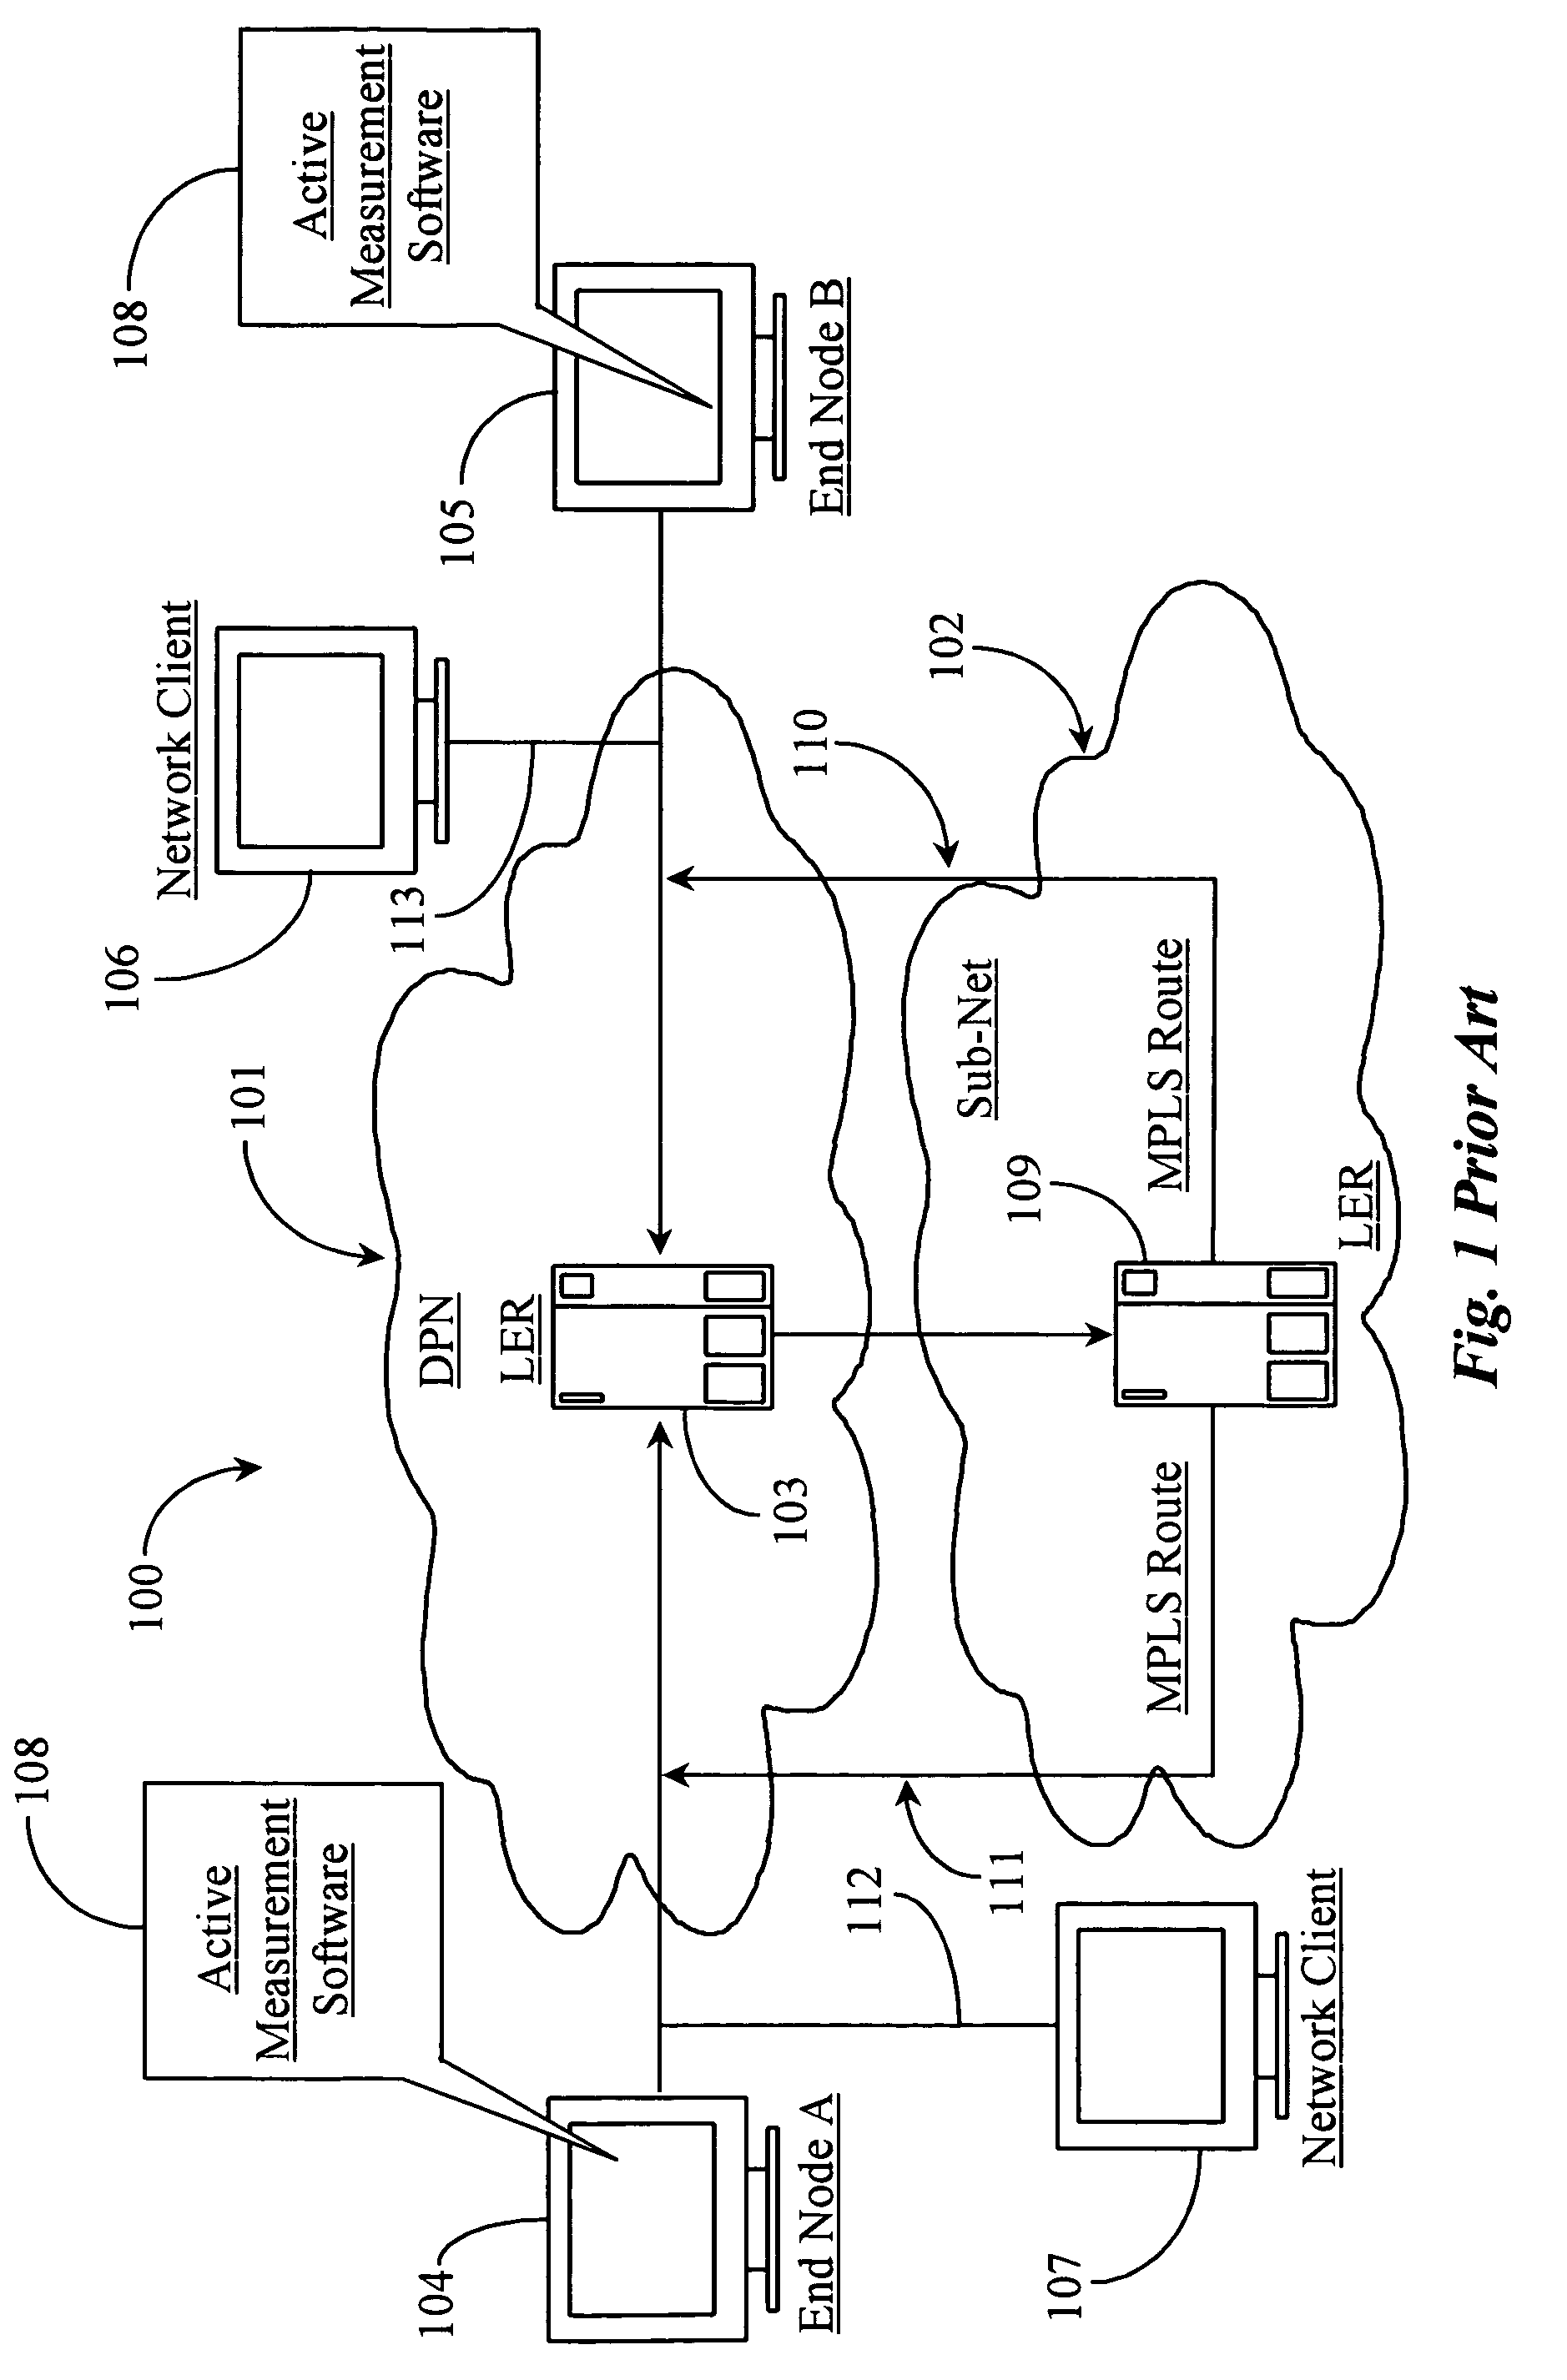 Method and apparatus for monitoring latency, jitter, packet throughput and packet loss ratio between two points on a network